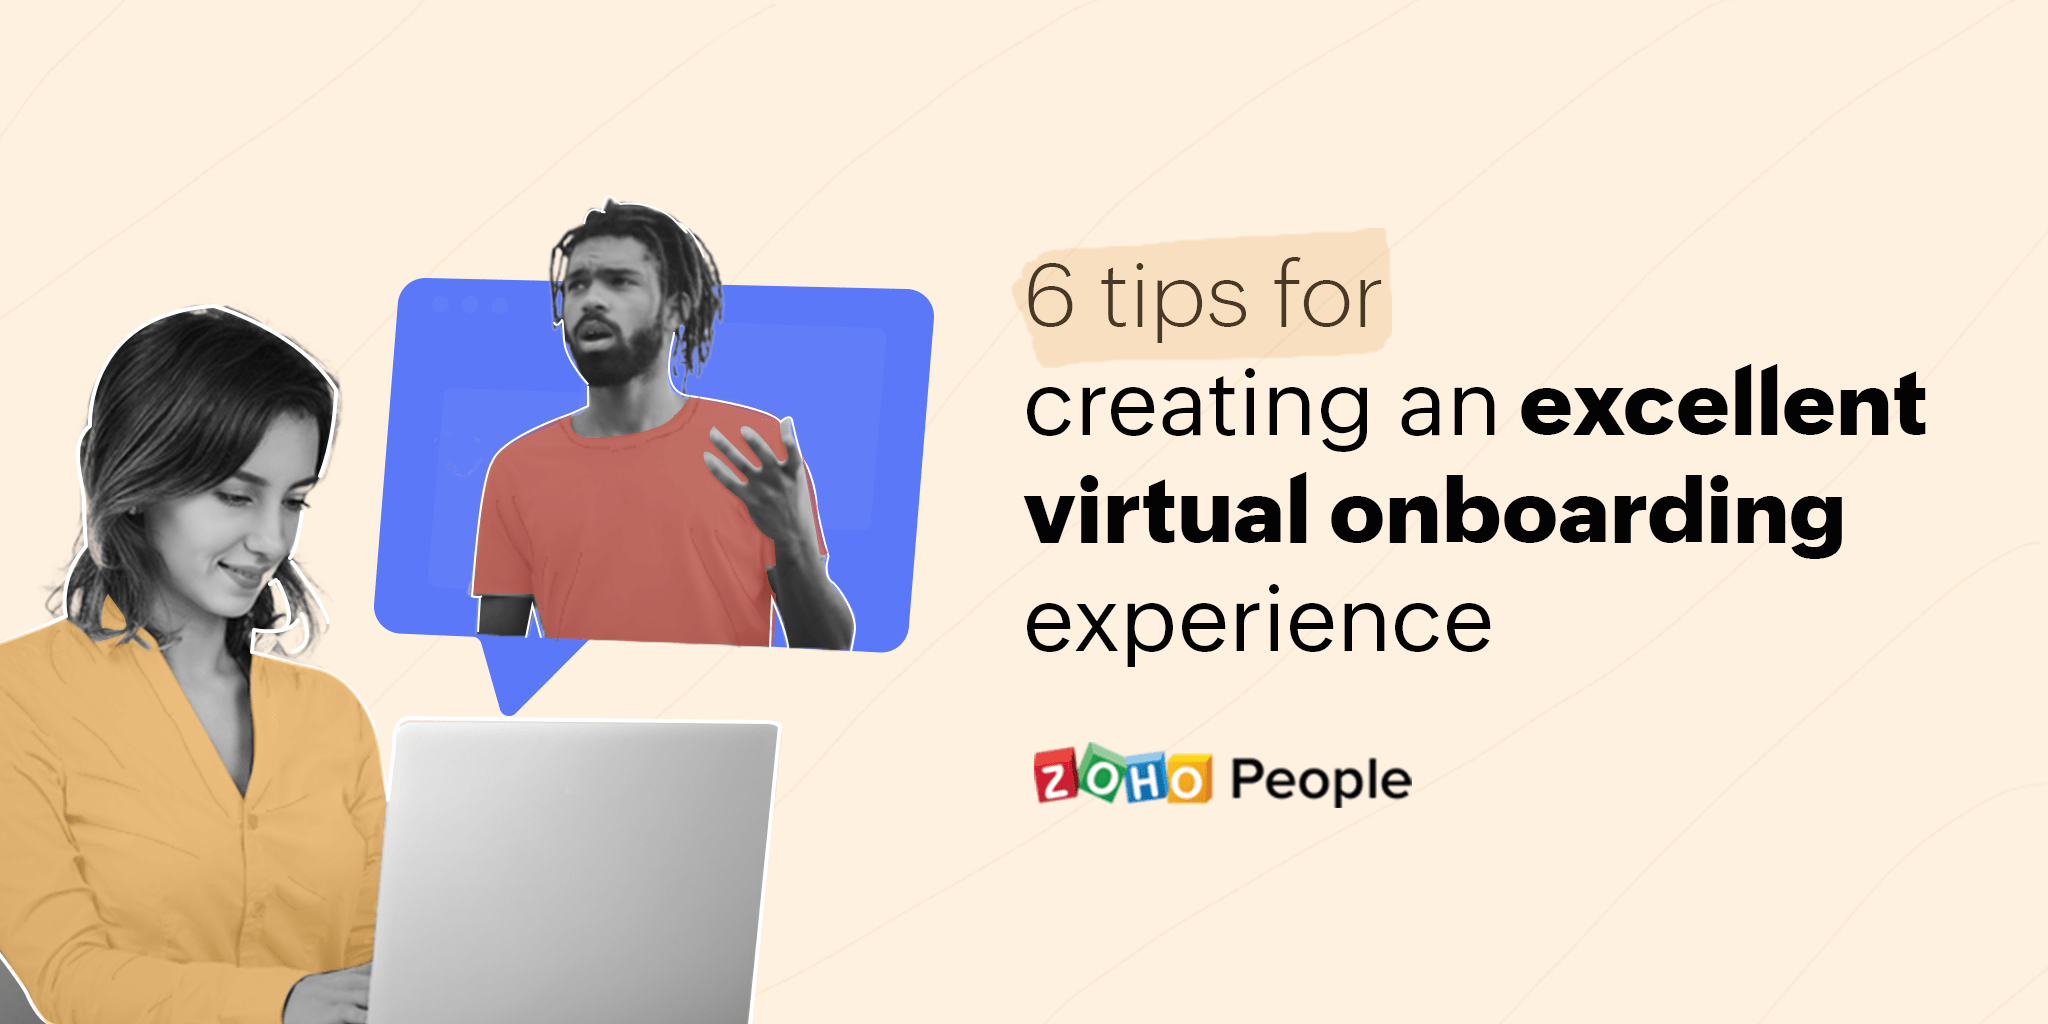 Tips to improve virtual onboarding